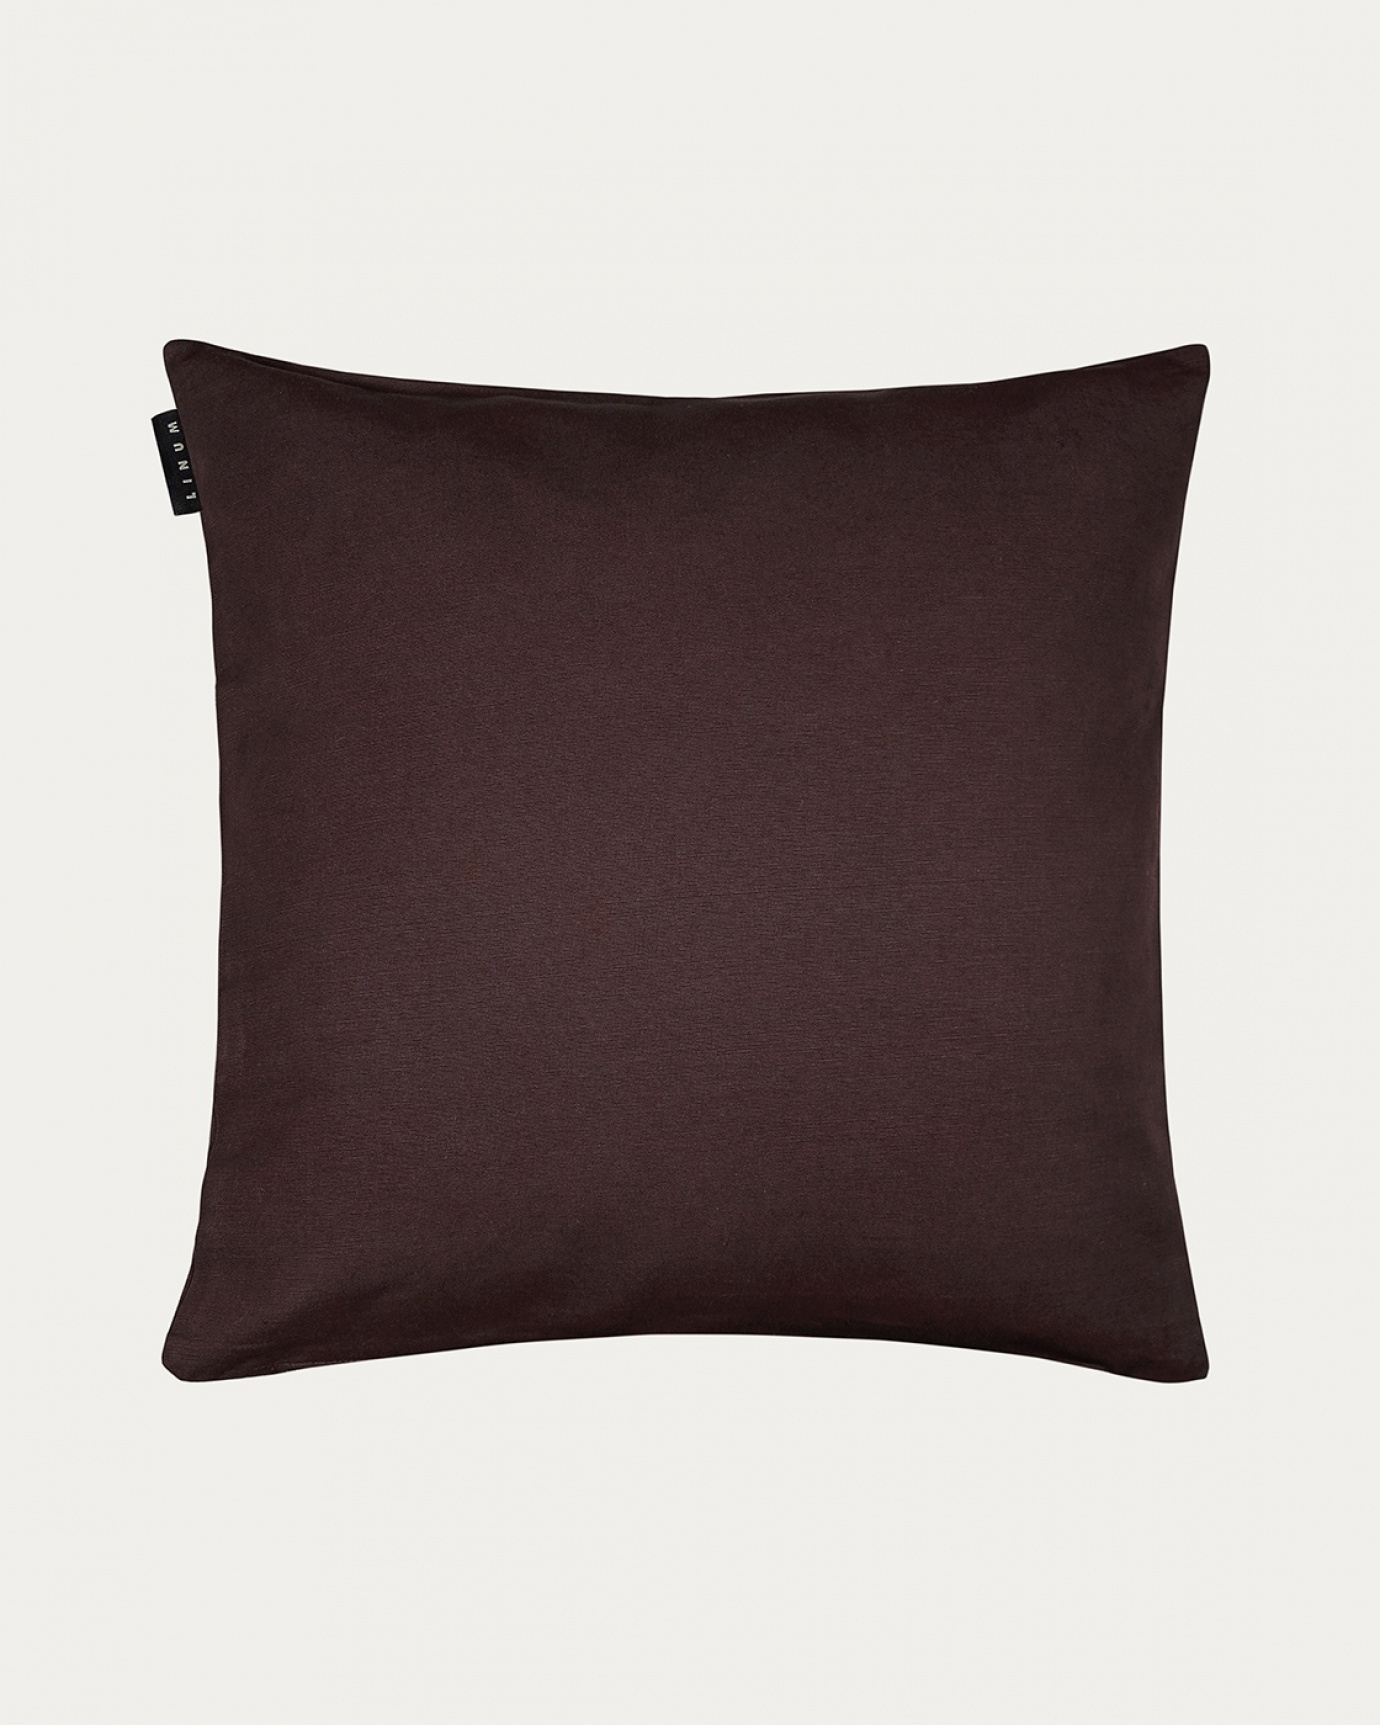 Product image dark brown ANNABELL cushion cover made of soft cotton from LINUM DESIGN. Size 50x50 cm.